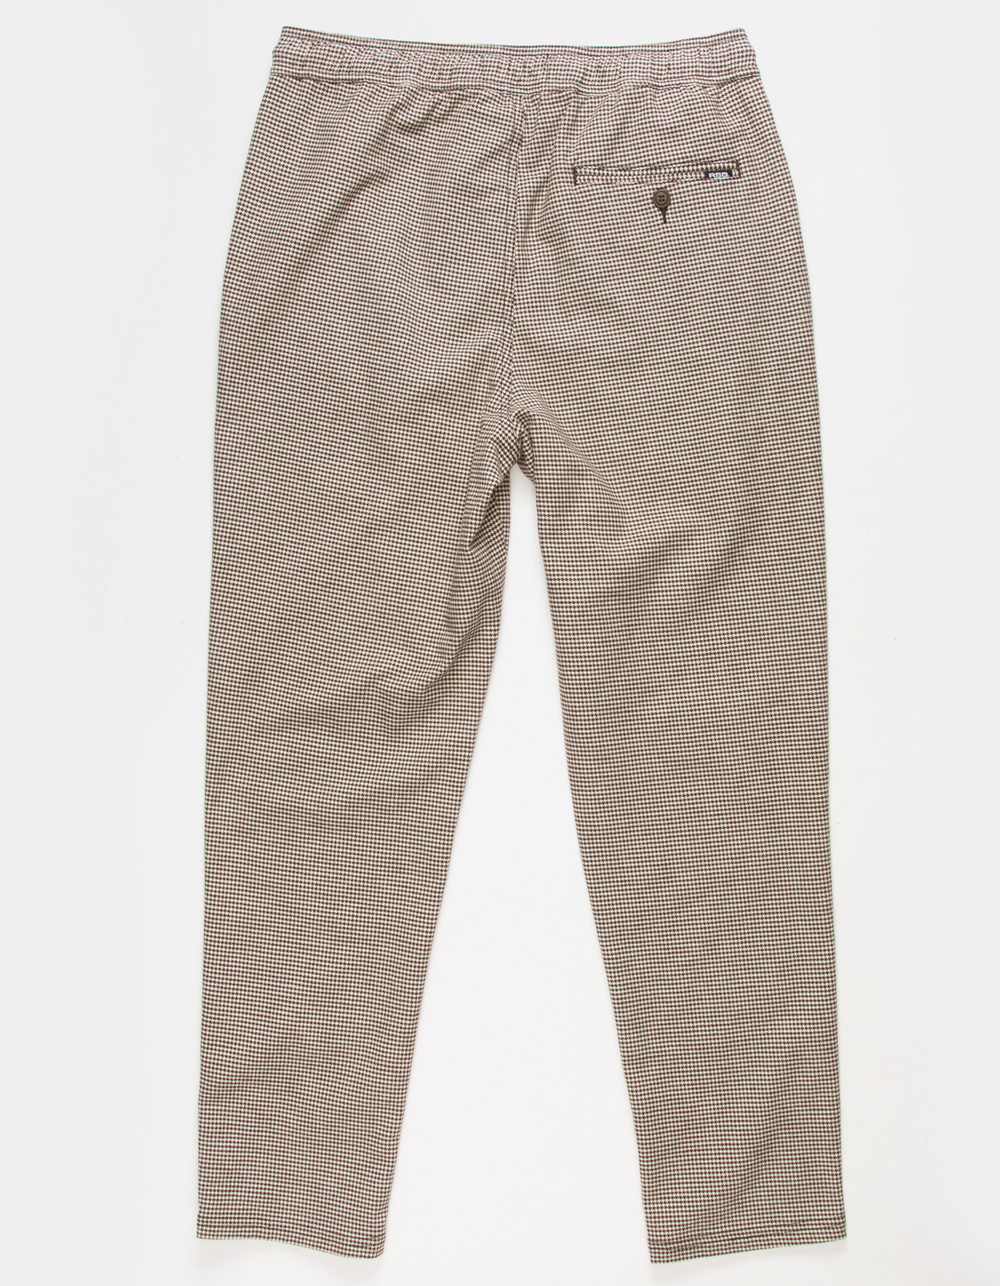 RSQ Mens Pull On Pants - BROWN/WHITE | Tillys